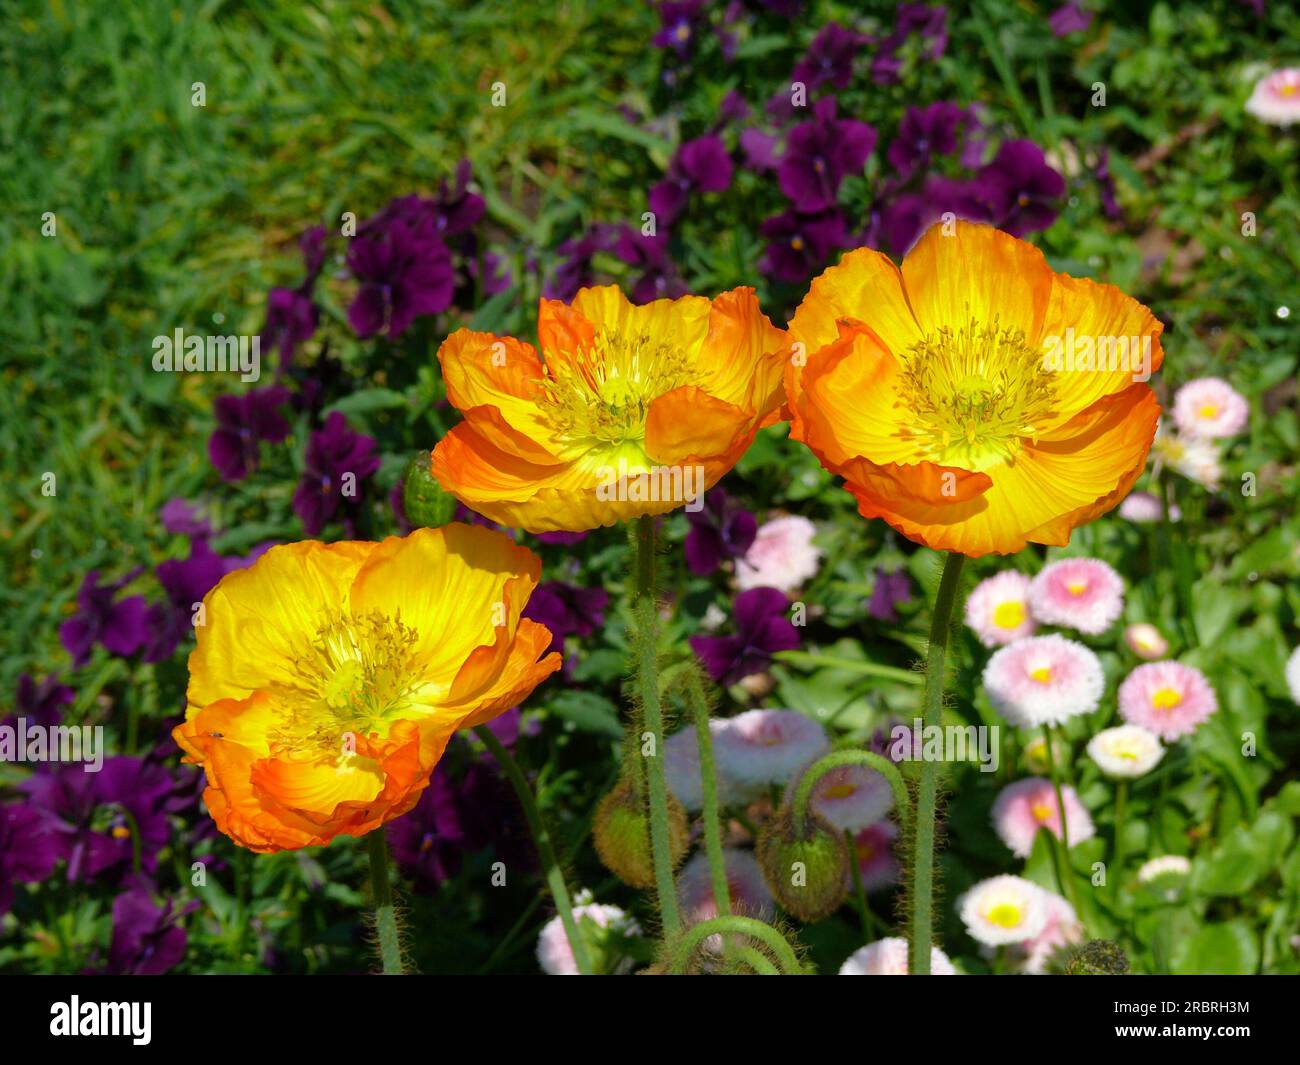 Image Of Summer Garden Filled With Alpine Plants Miniature Flowers